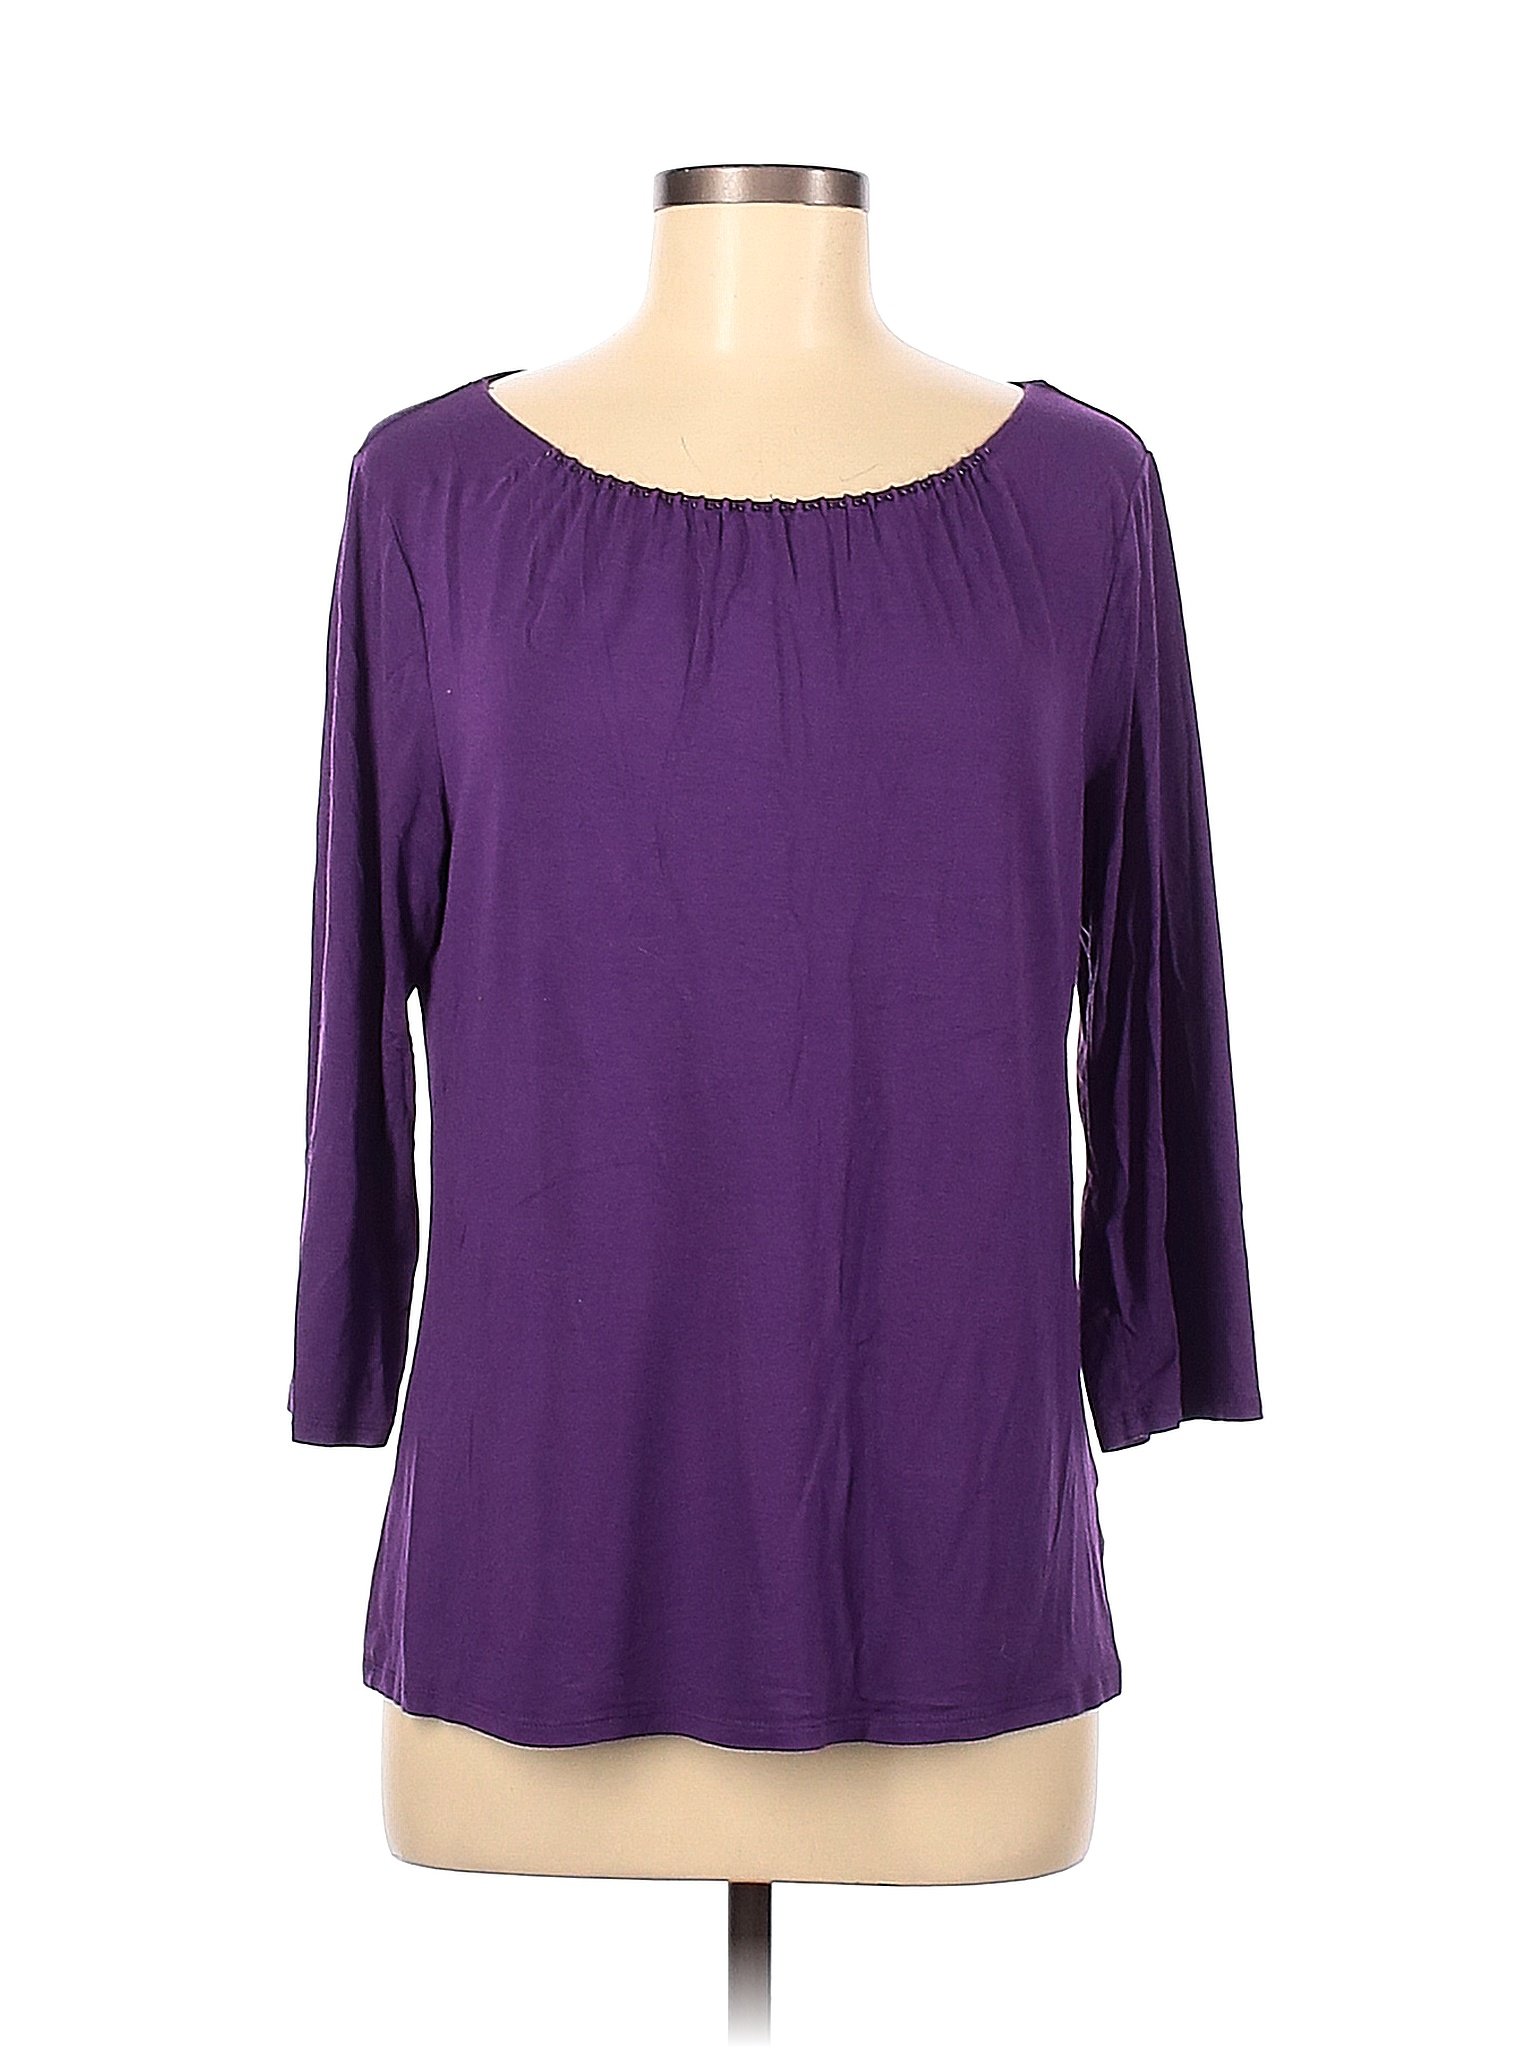 Coldwater Creek Solid Colored Purple Long Sleeve Top Size M - 76% off ...